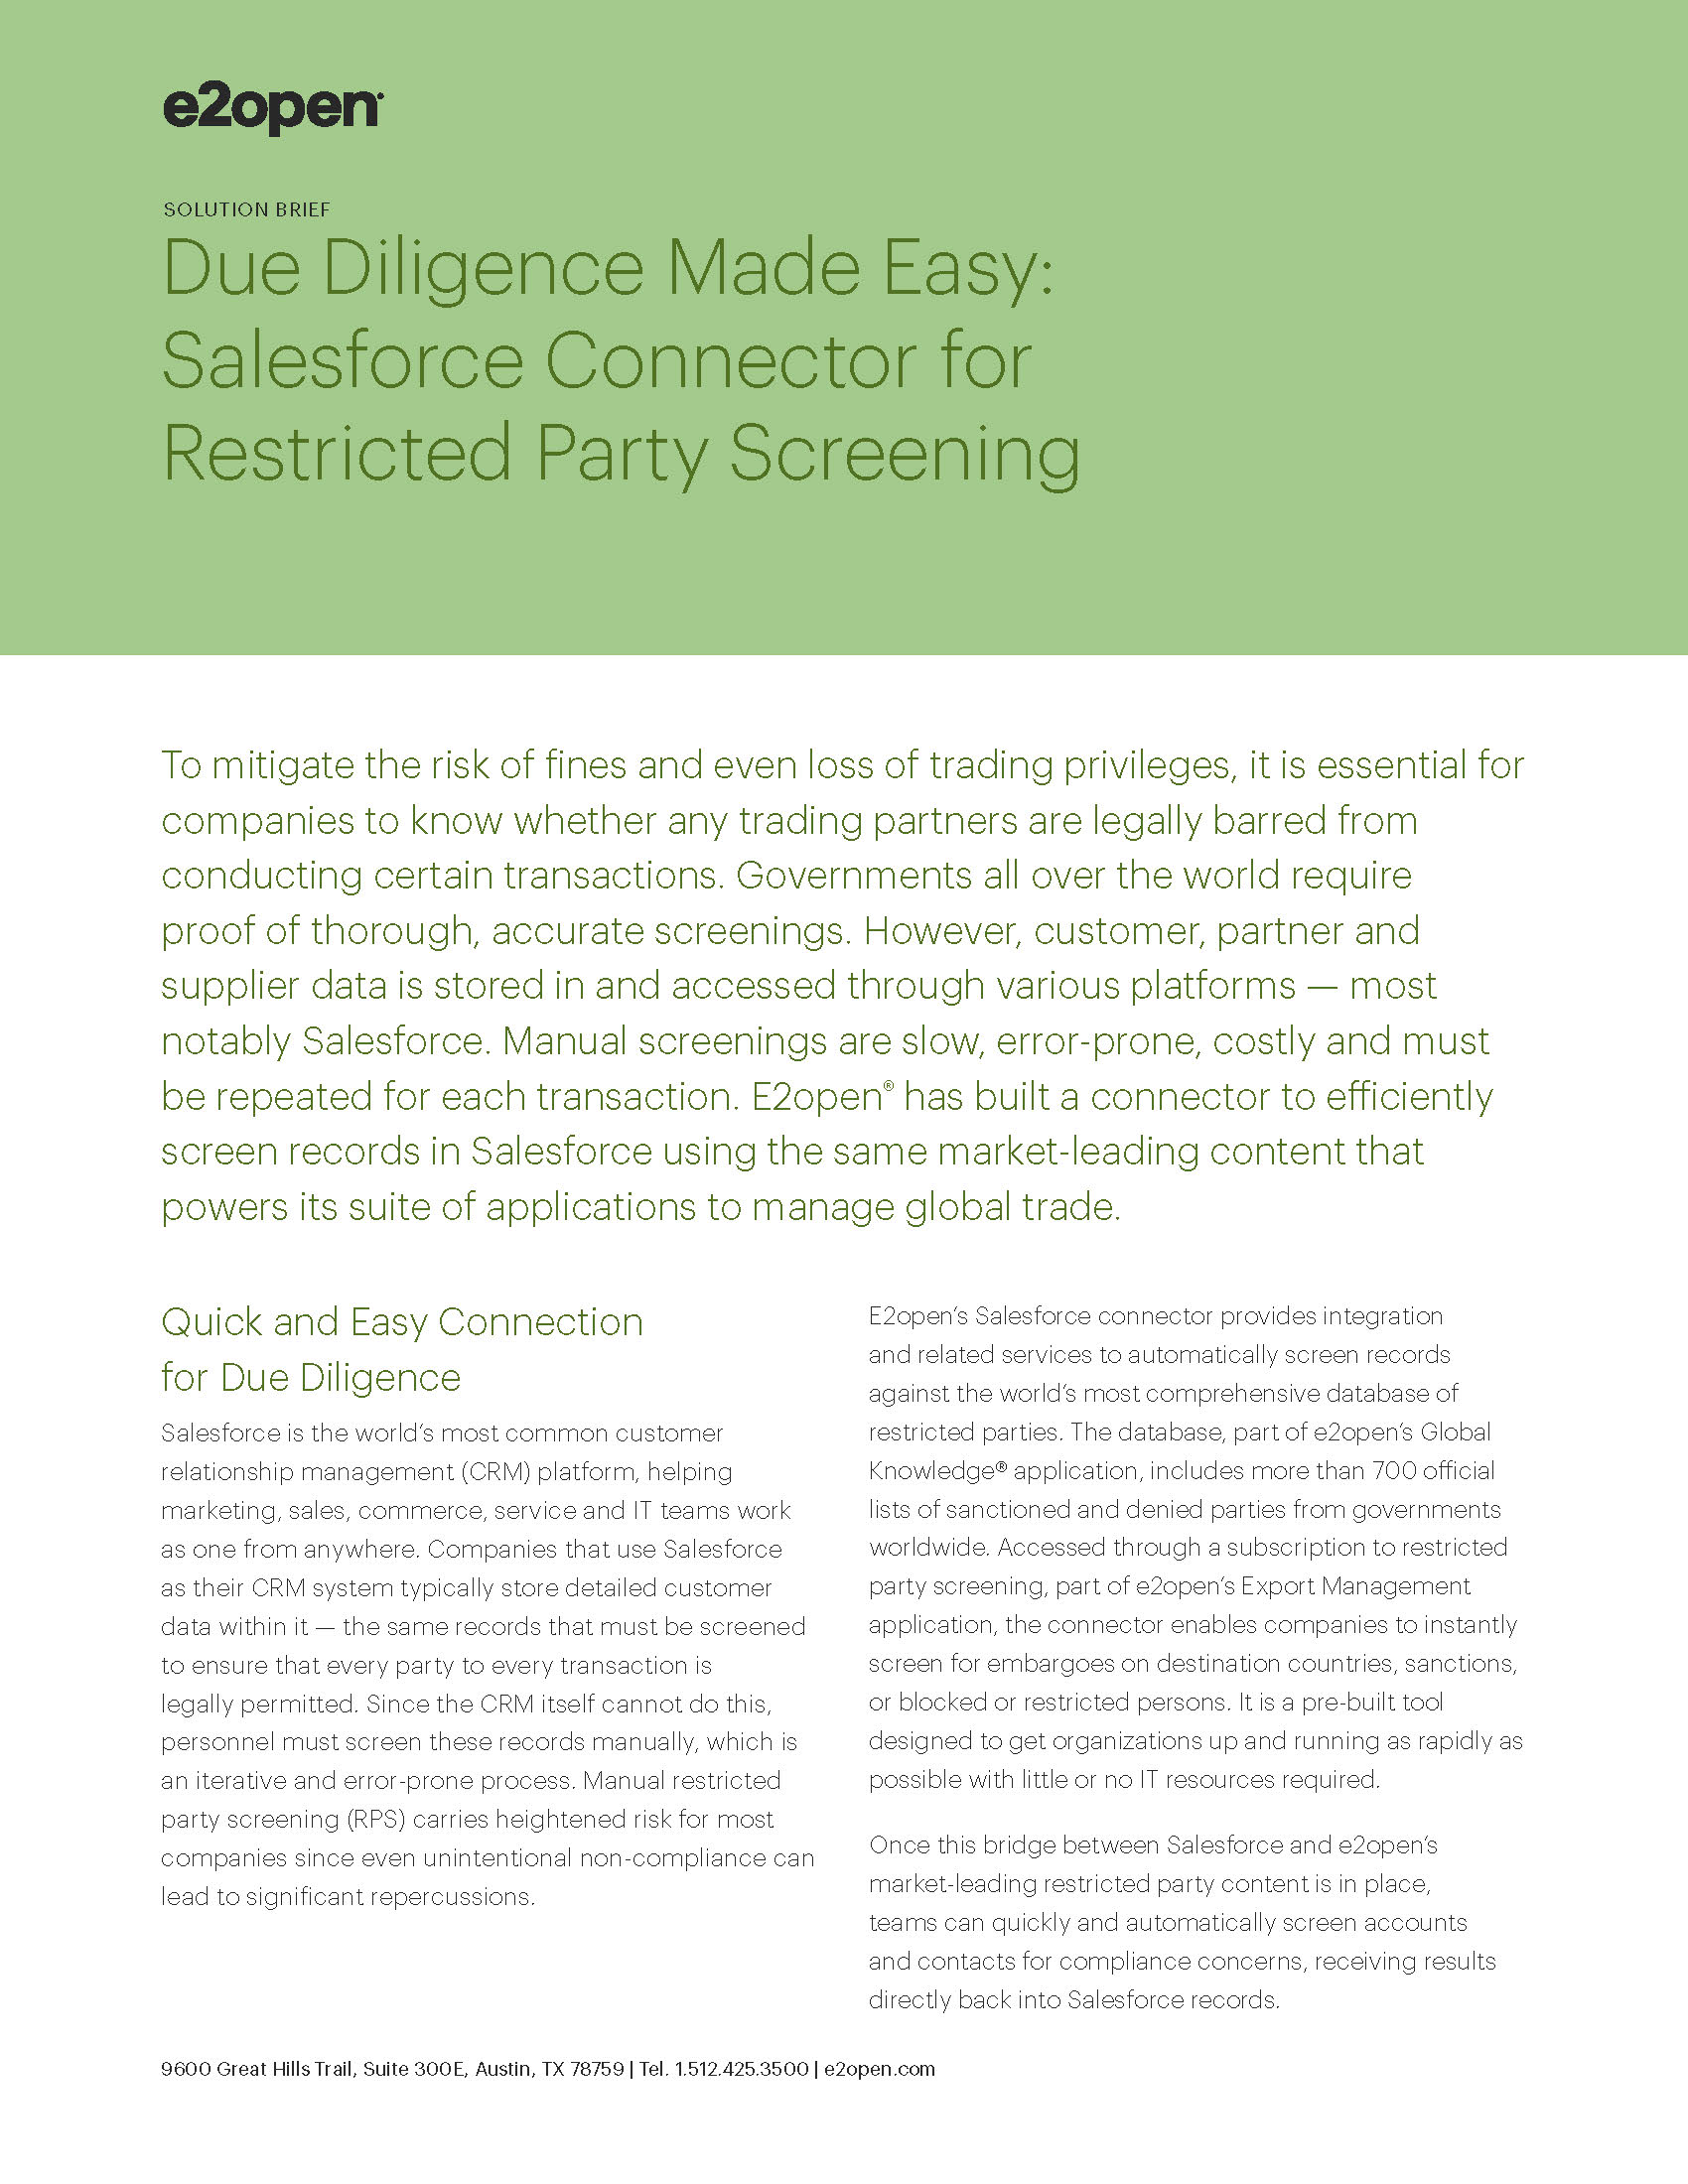 Due Diligence Made Easy: Salesforce Connector for Restricted Party Screening